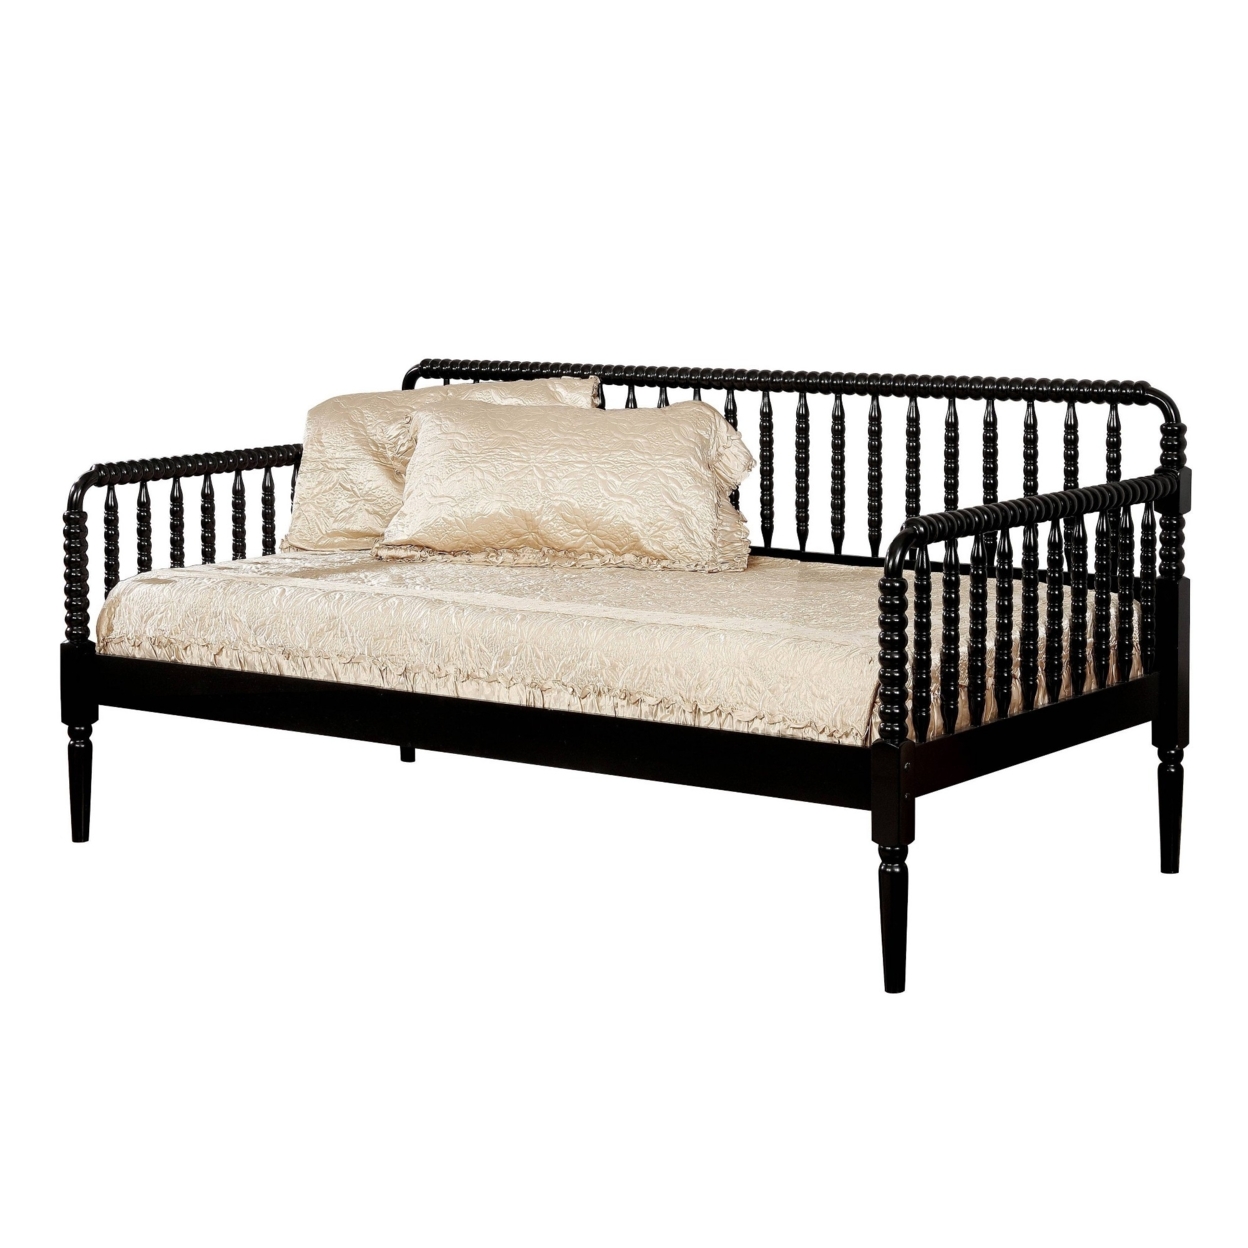 Wooden Twin Size Daybed With Spool Bed Frame And Railing Headboard, Black- Saltoro Sherpi